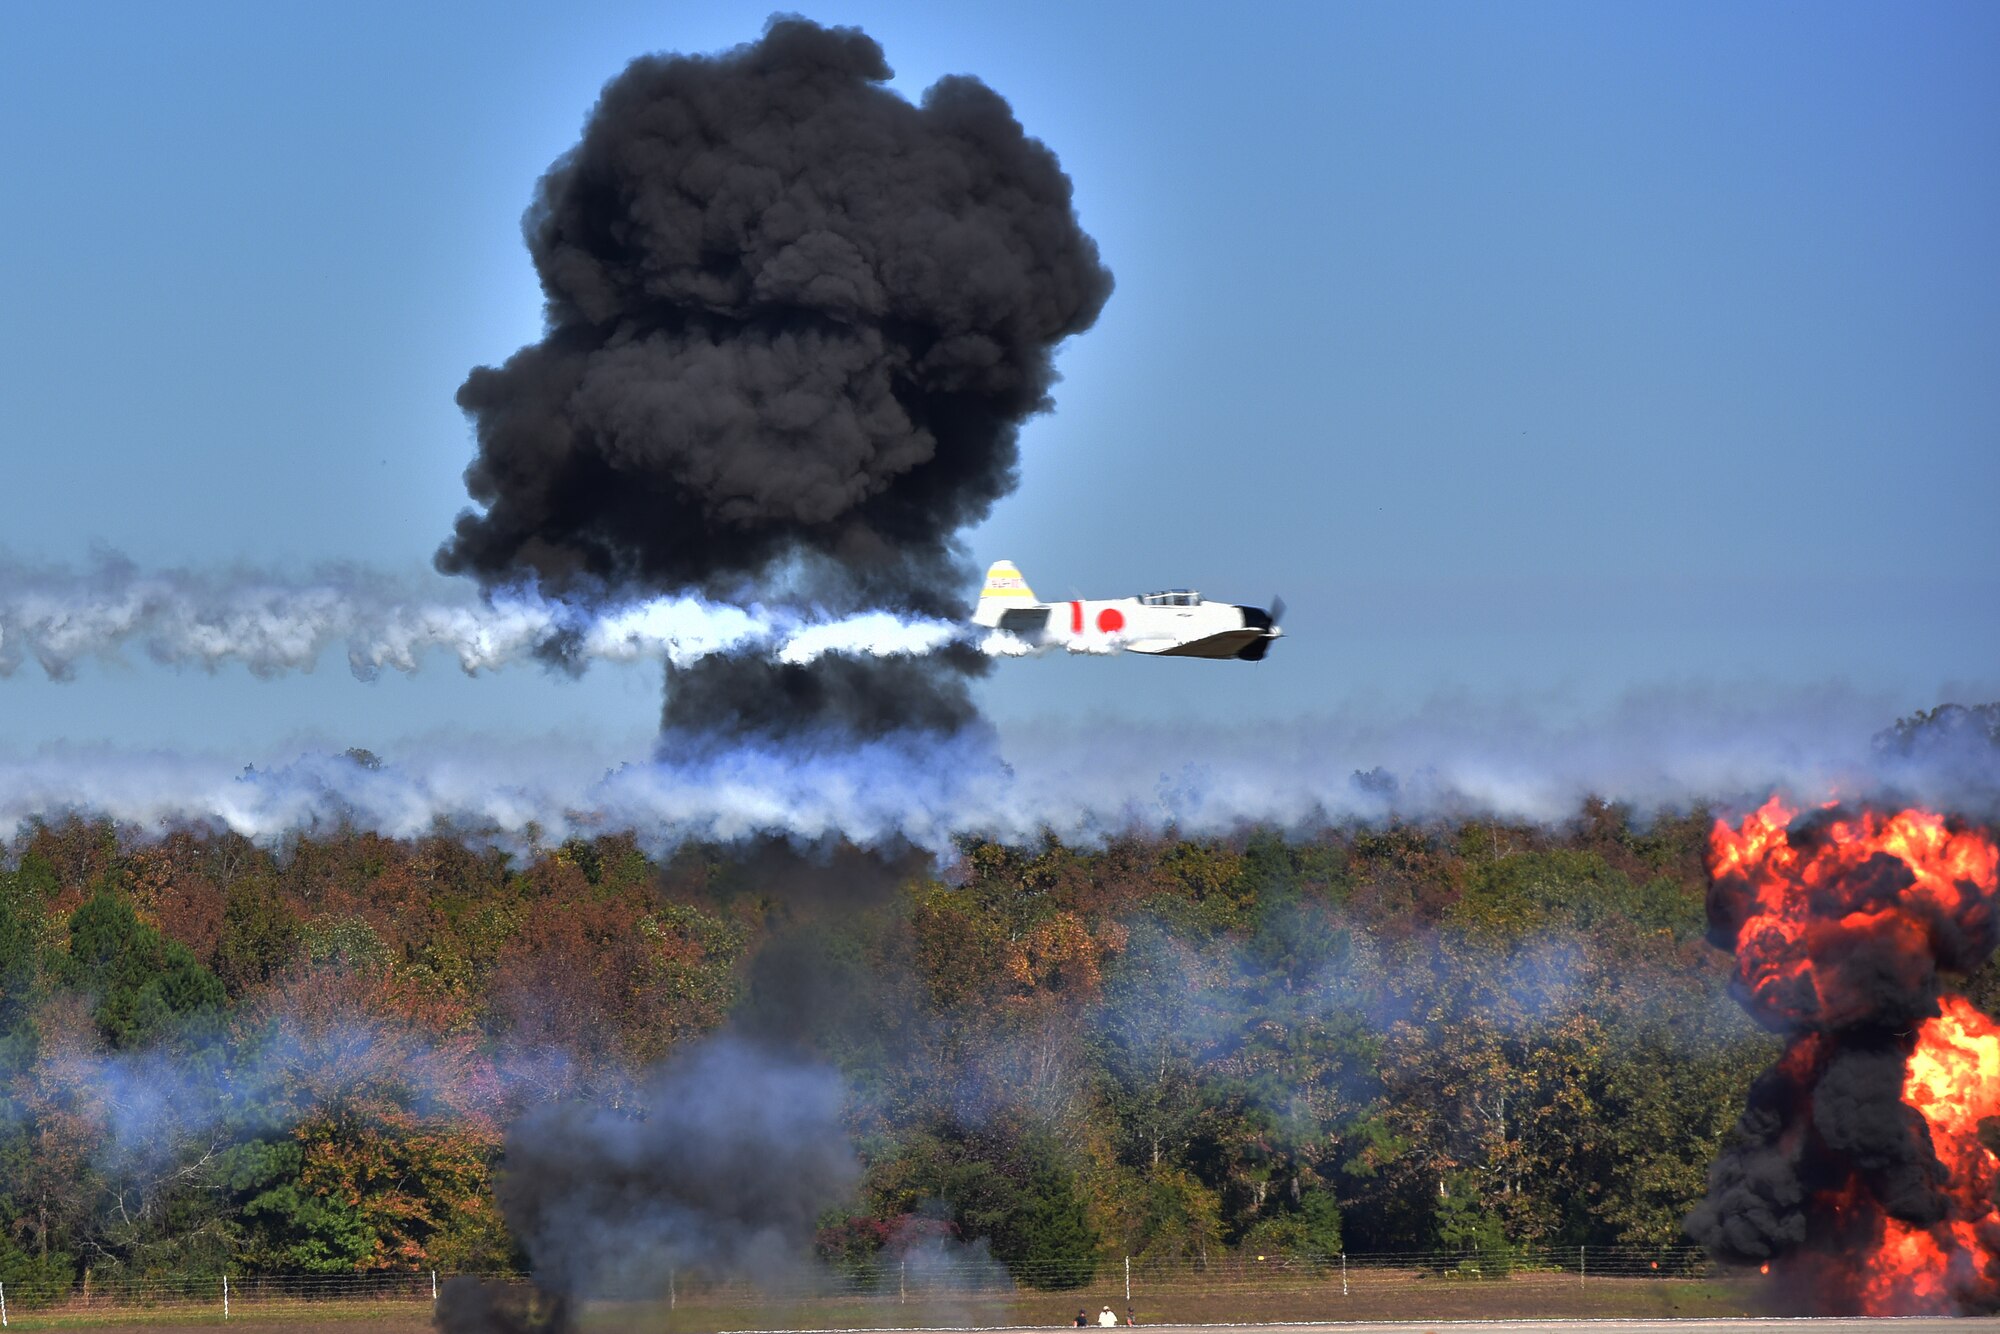 Japanese Zero aircraft fly's over mock explosions simulating attack runs from left to right.